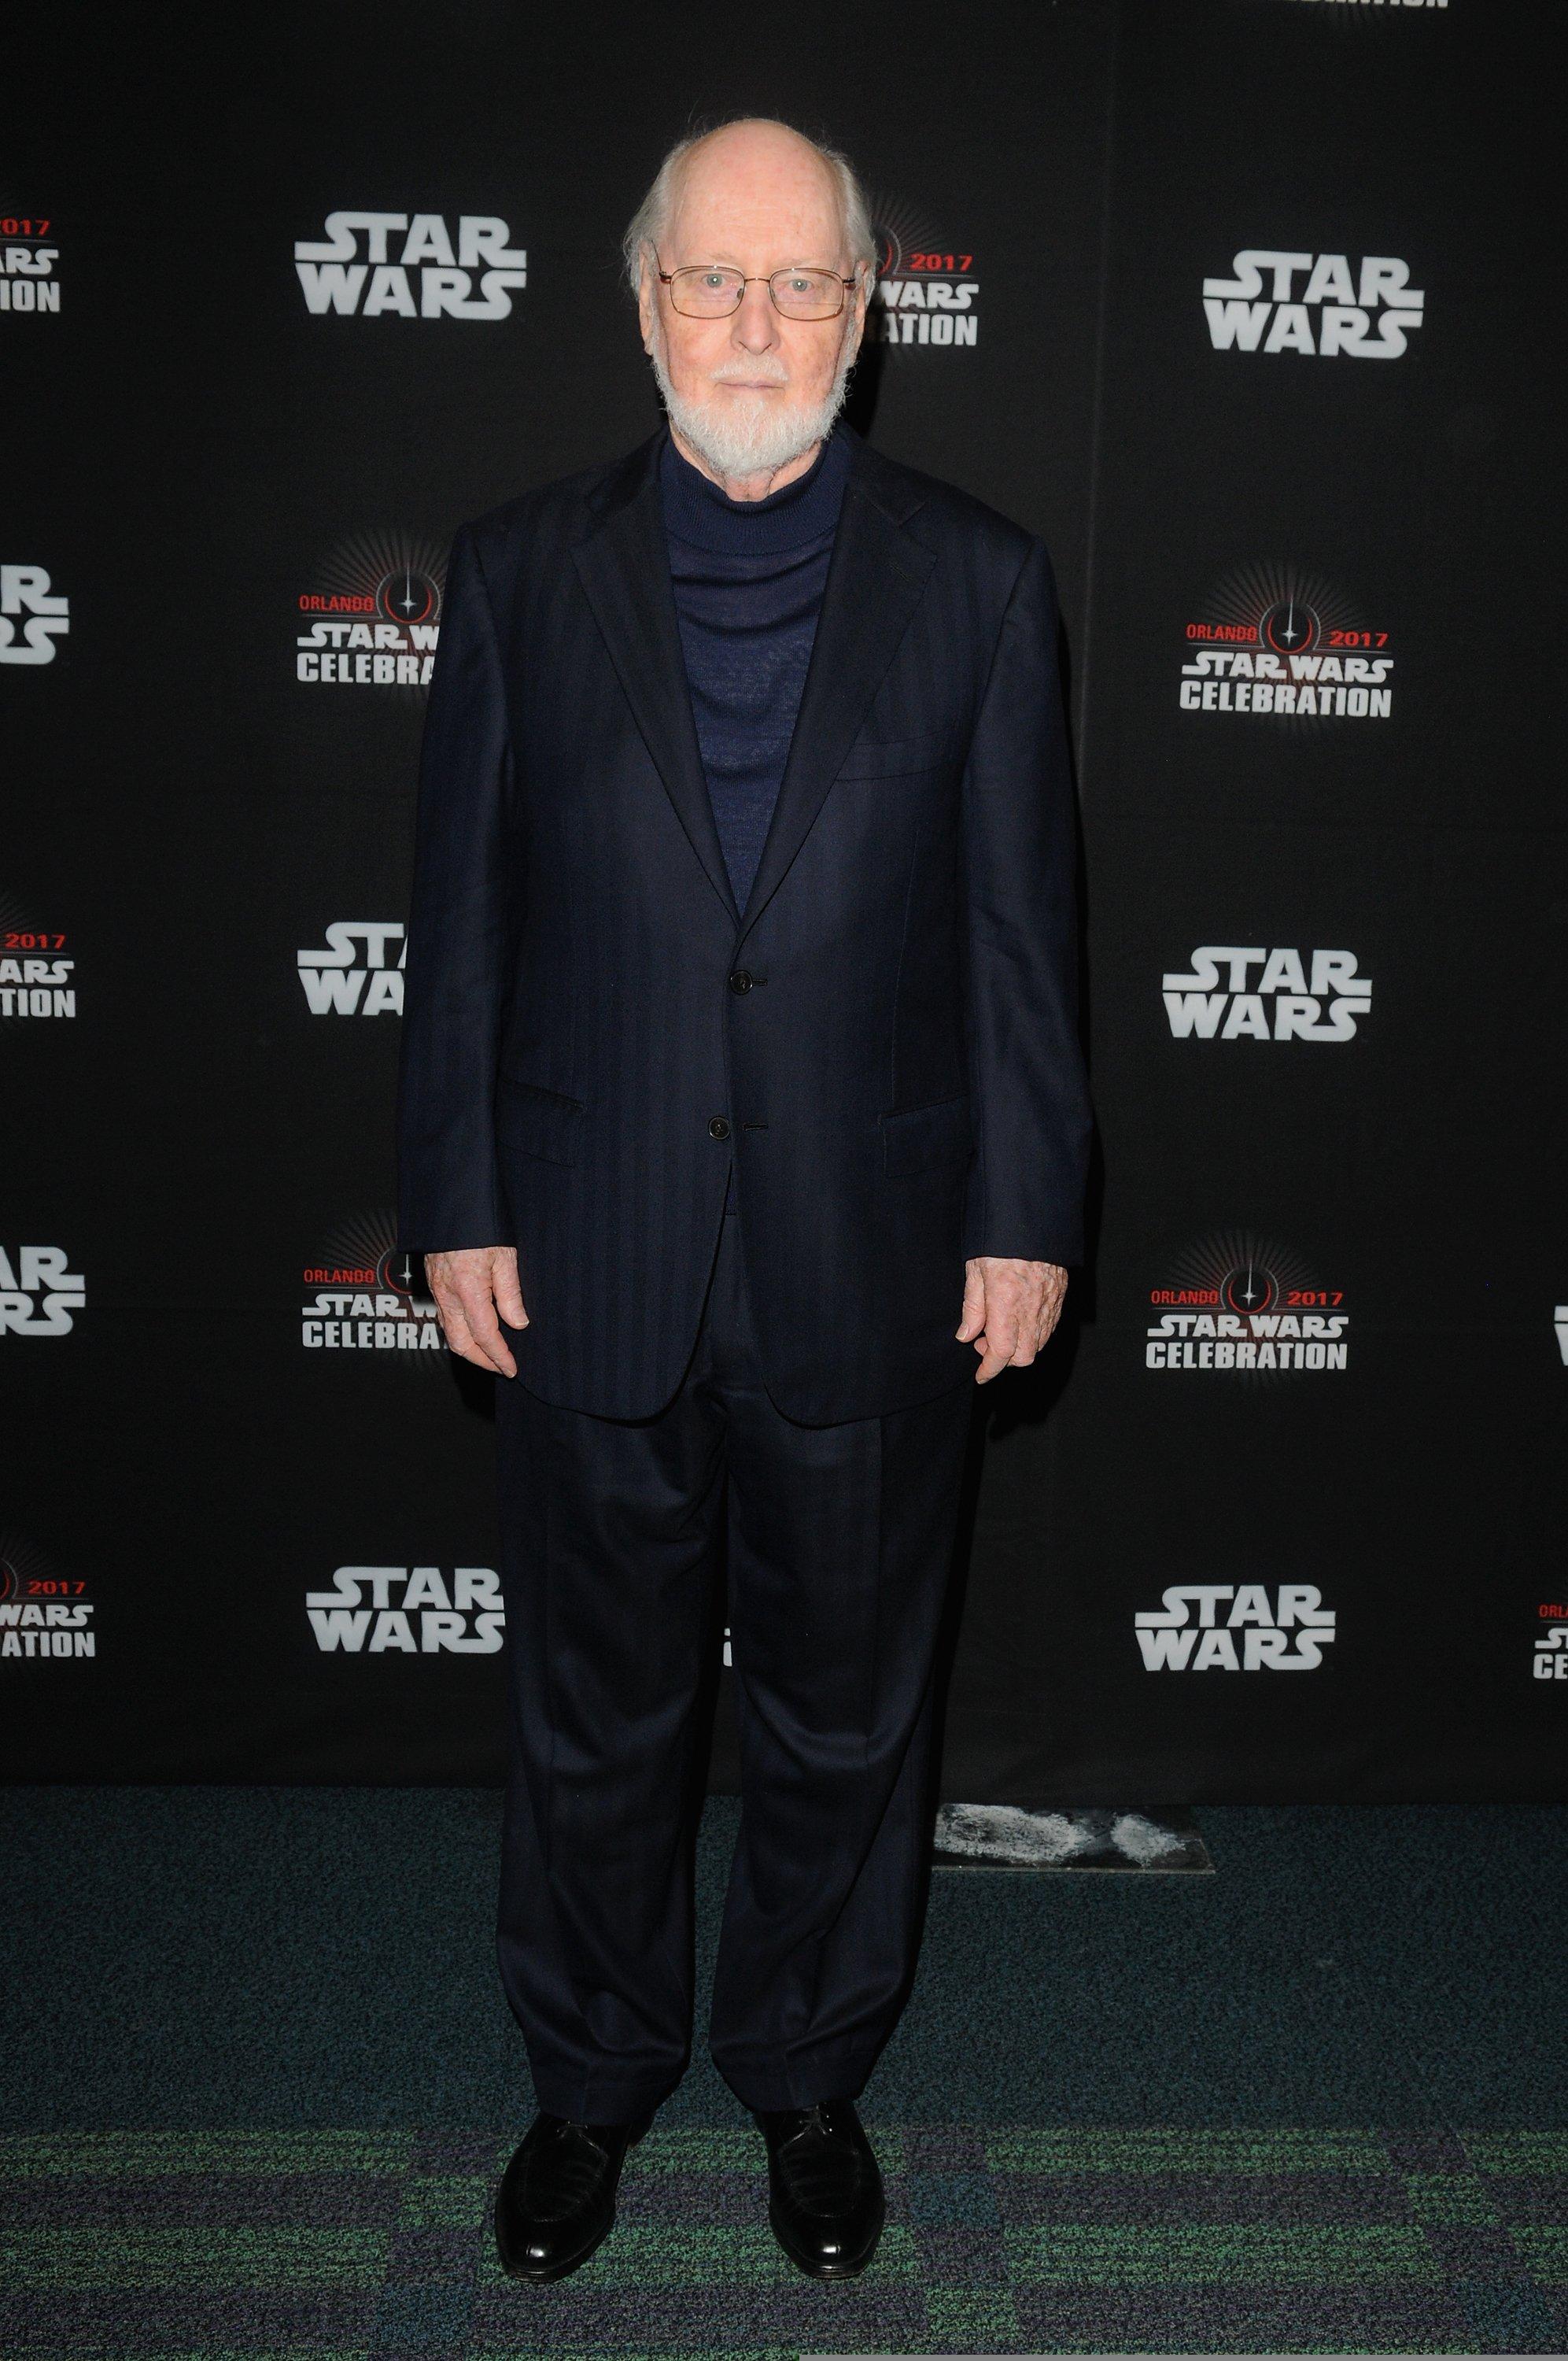 John Williams attends the 40 Years of Star Wars panel during the 2017 Star Wars Celebrationat Orange County Convention Center on April 13, 2017 in Orlando, Florida.